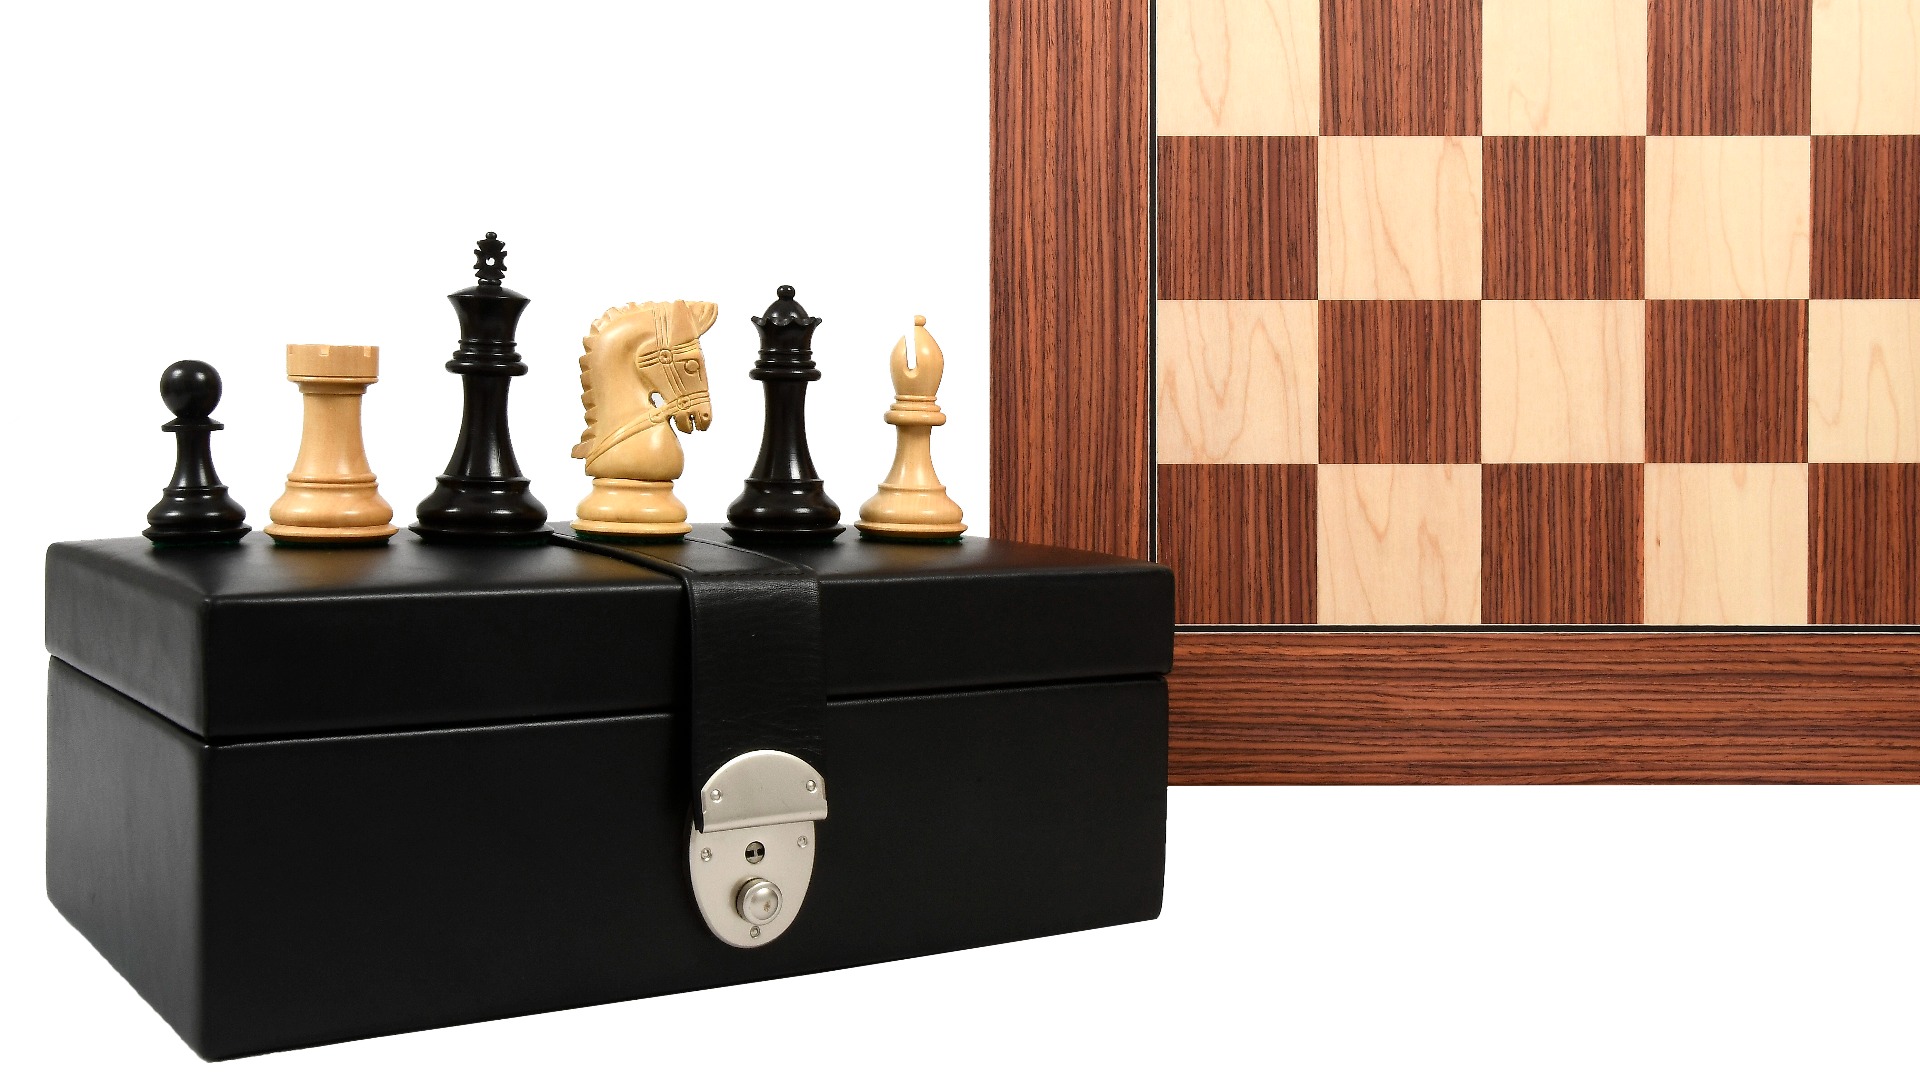 CB Bridle Series Club Chess Pieces in Indian Rose Wood & Box Wood 4.6" King 